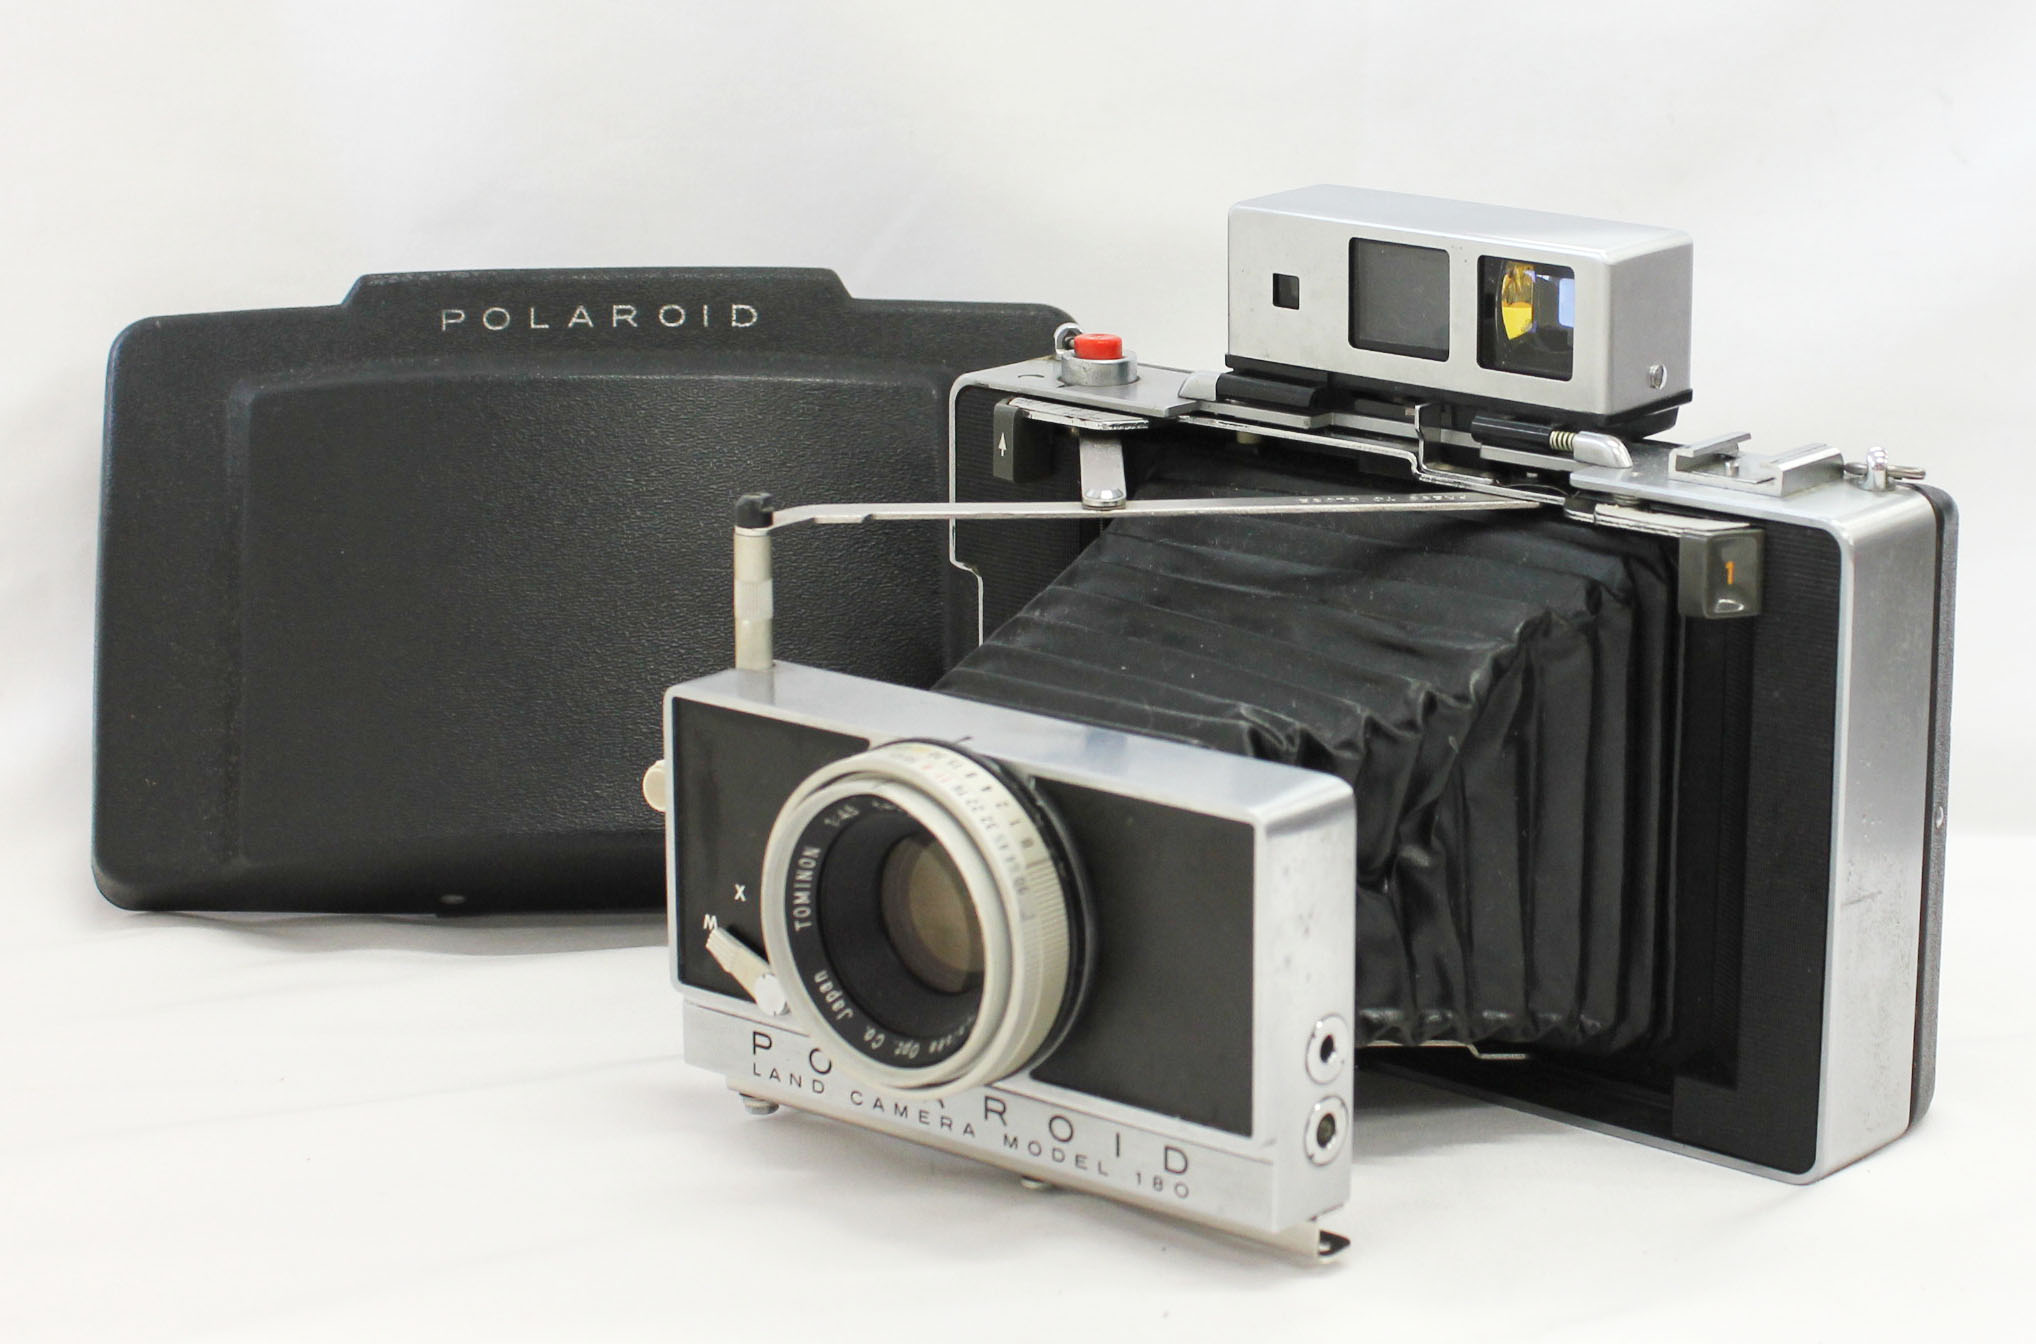 Japan Used Camera Shop | [Excellent+++] Polaroid Land Camera Model 180 Instant Film Camera w/ Tominon 114mm F/4.5 from Japan